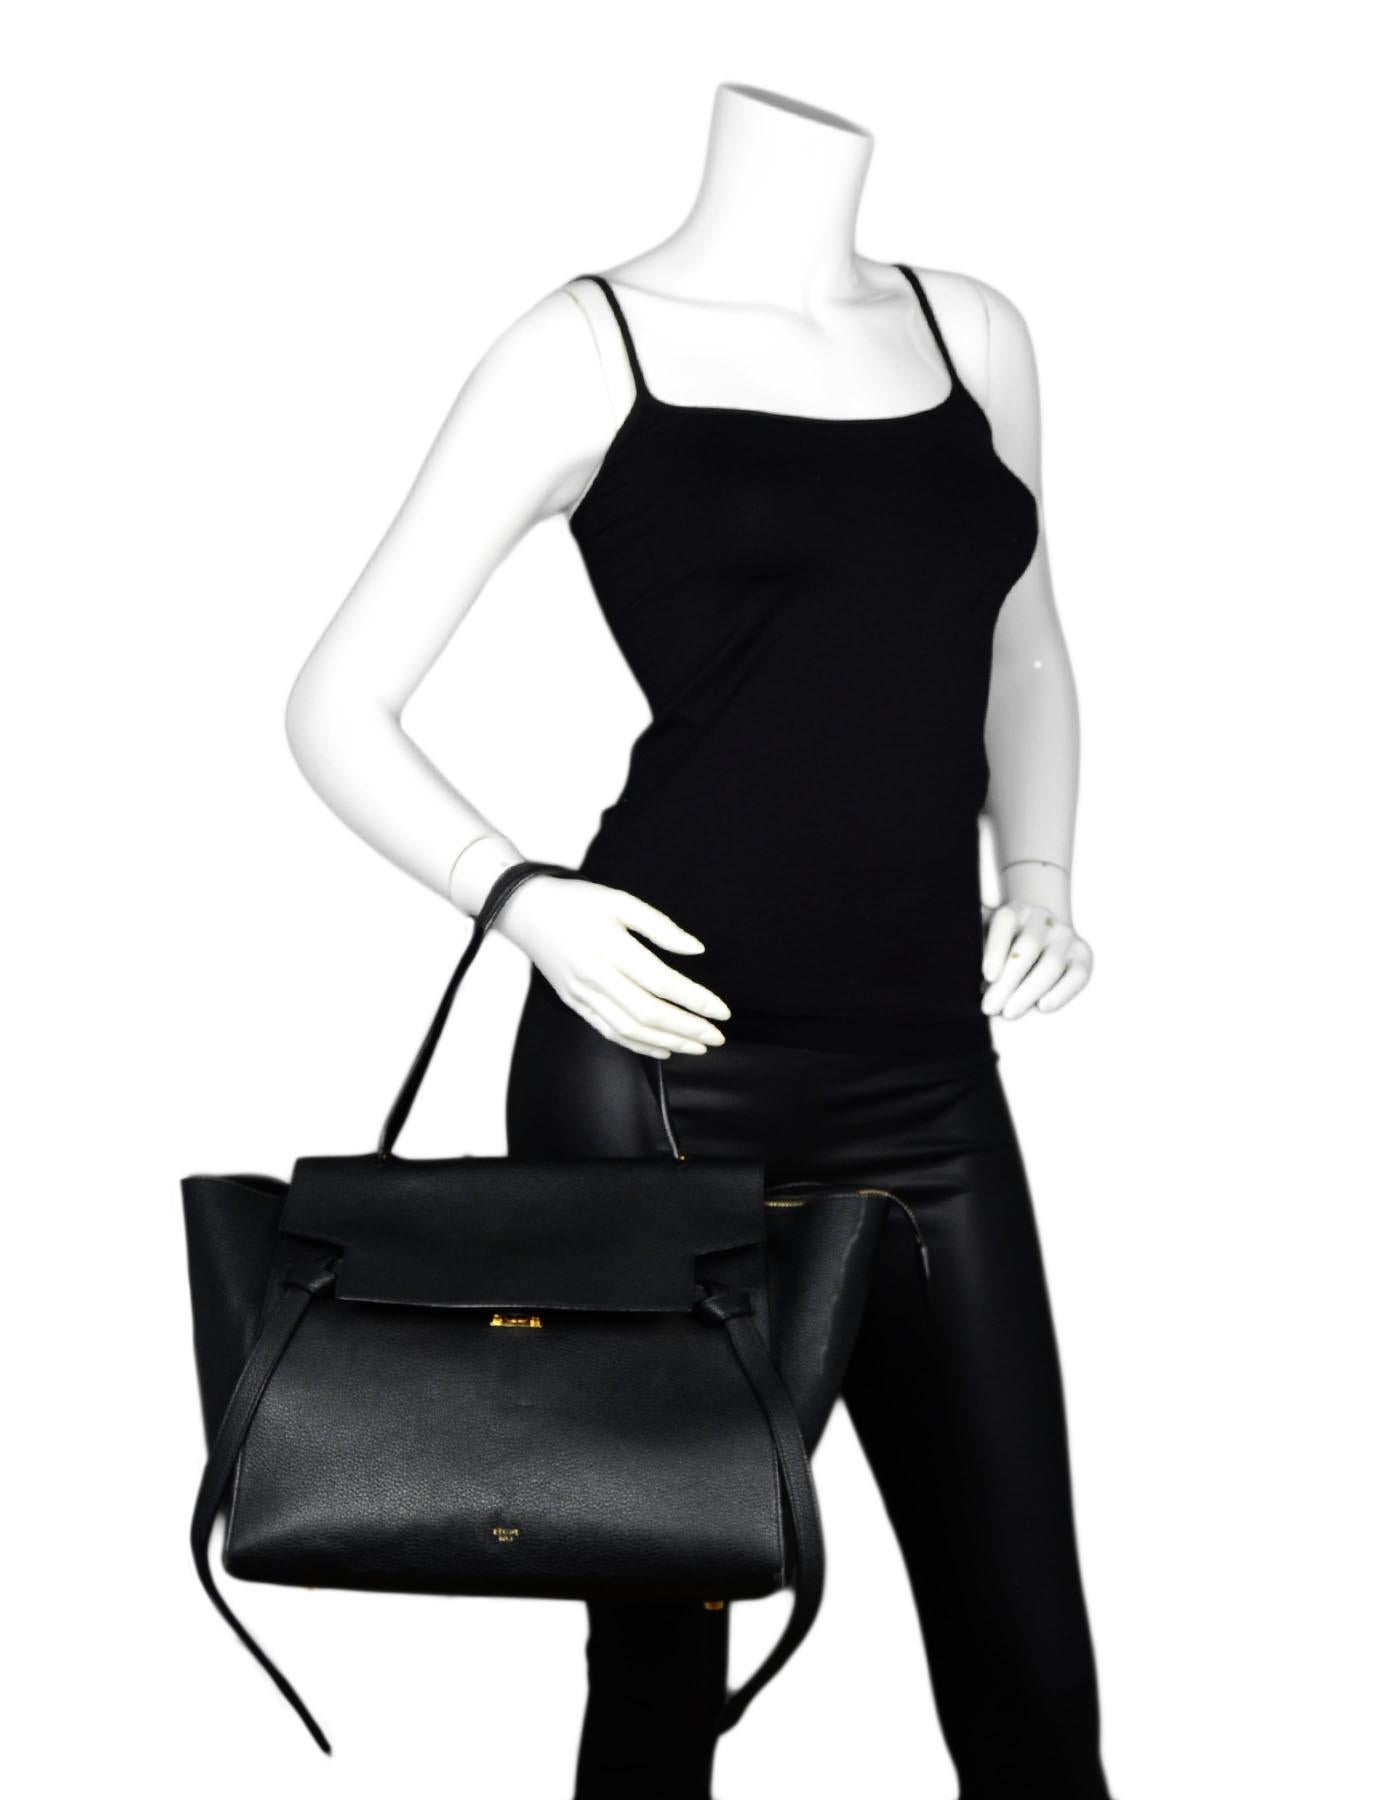 Celine Black Grained Calfskin Leather Small Belt Bag

Made In: Italy
Color: Black
Hardware: Goldtone hardware
Materials: Grained calfskin leather
Lining: Black suede lining 
Closure/Opening: Top zip, top flap with magnetic snap
Exterior Pockets: